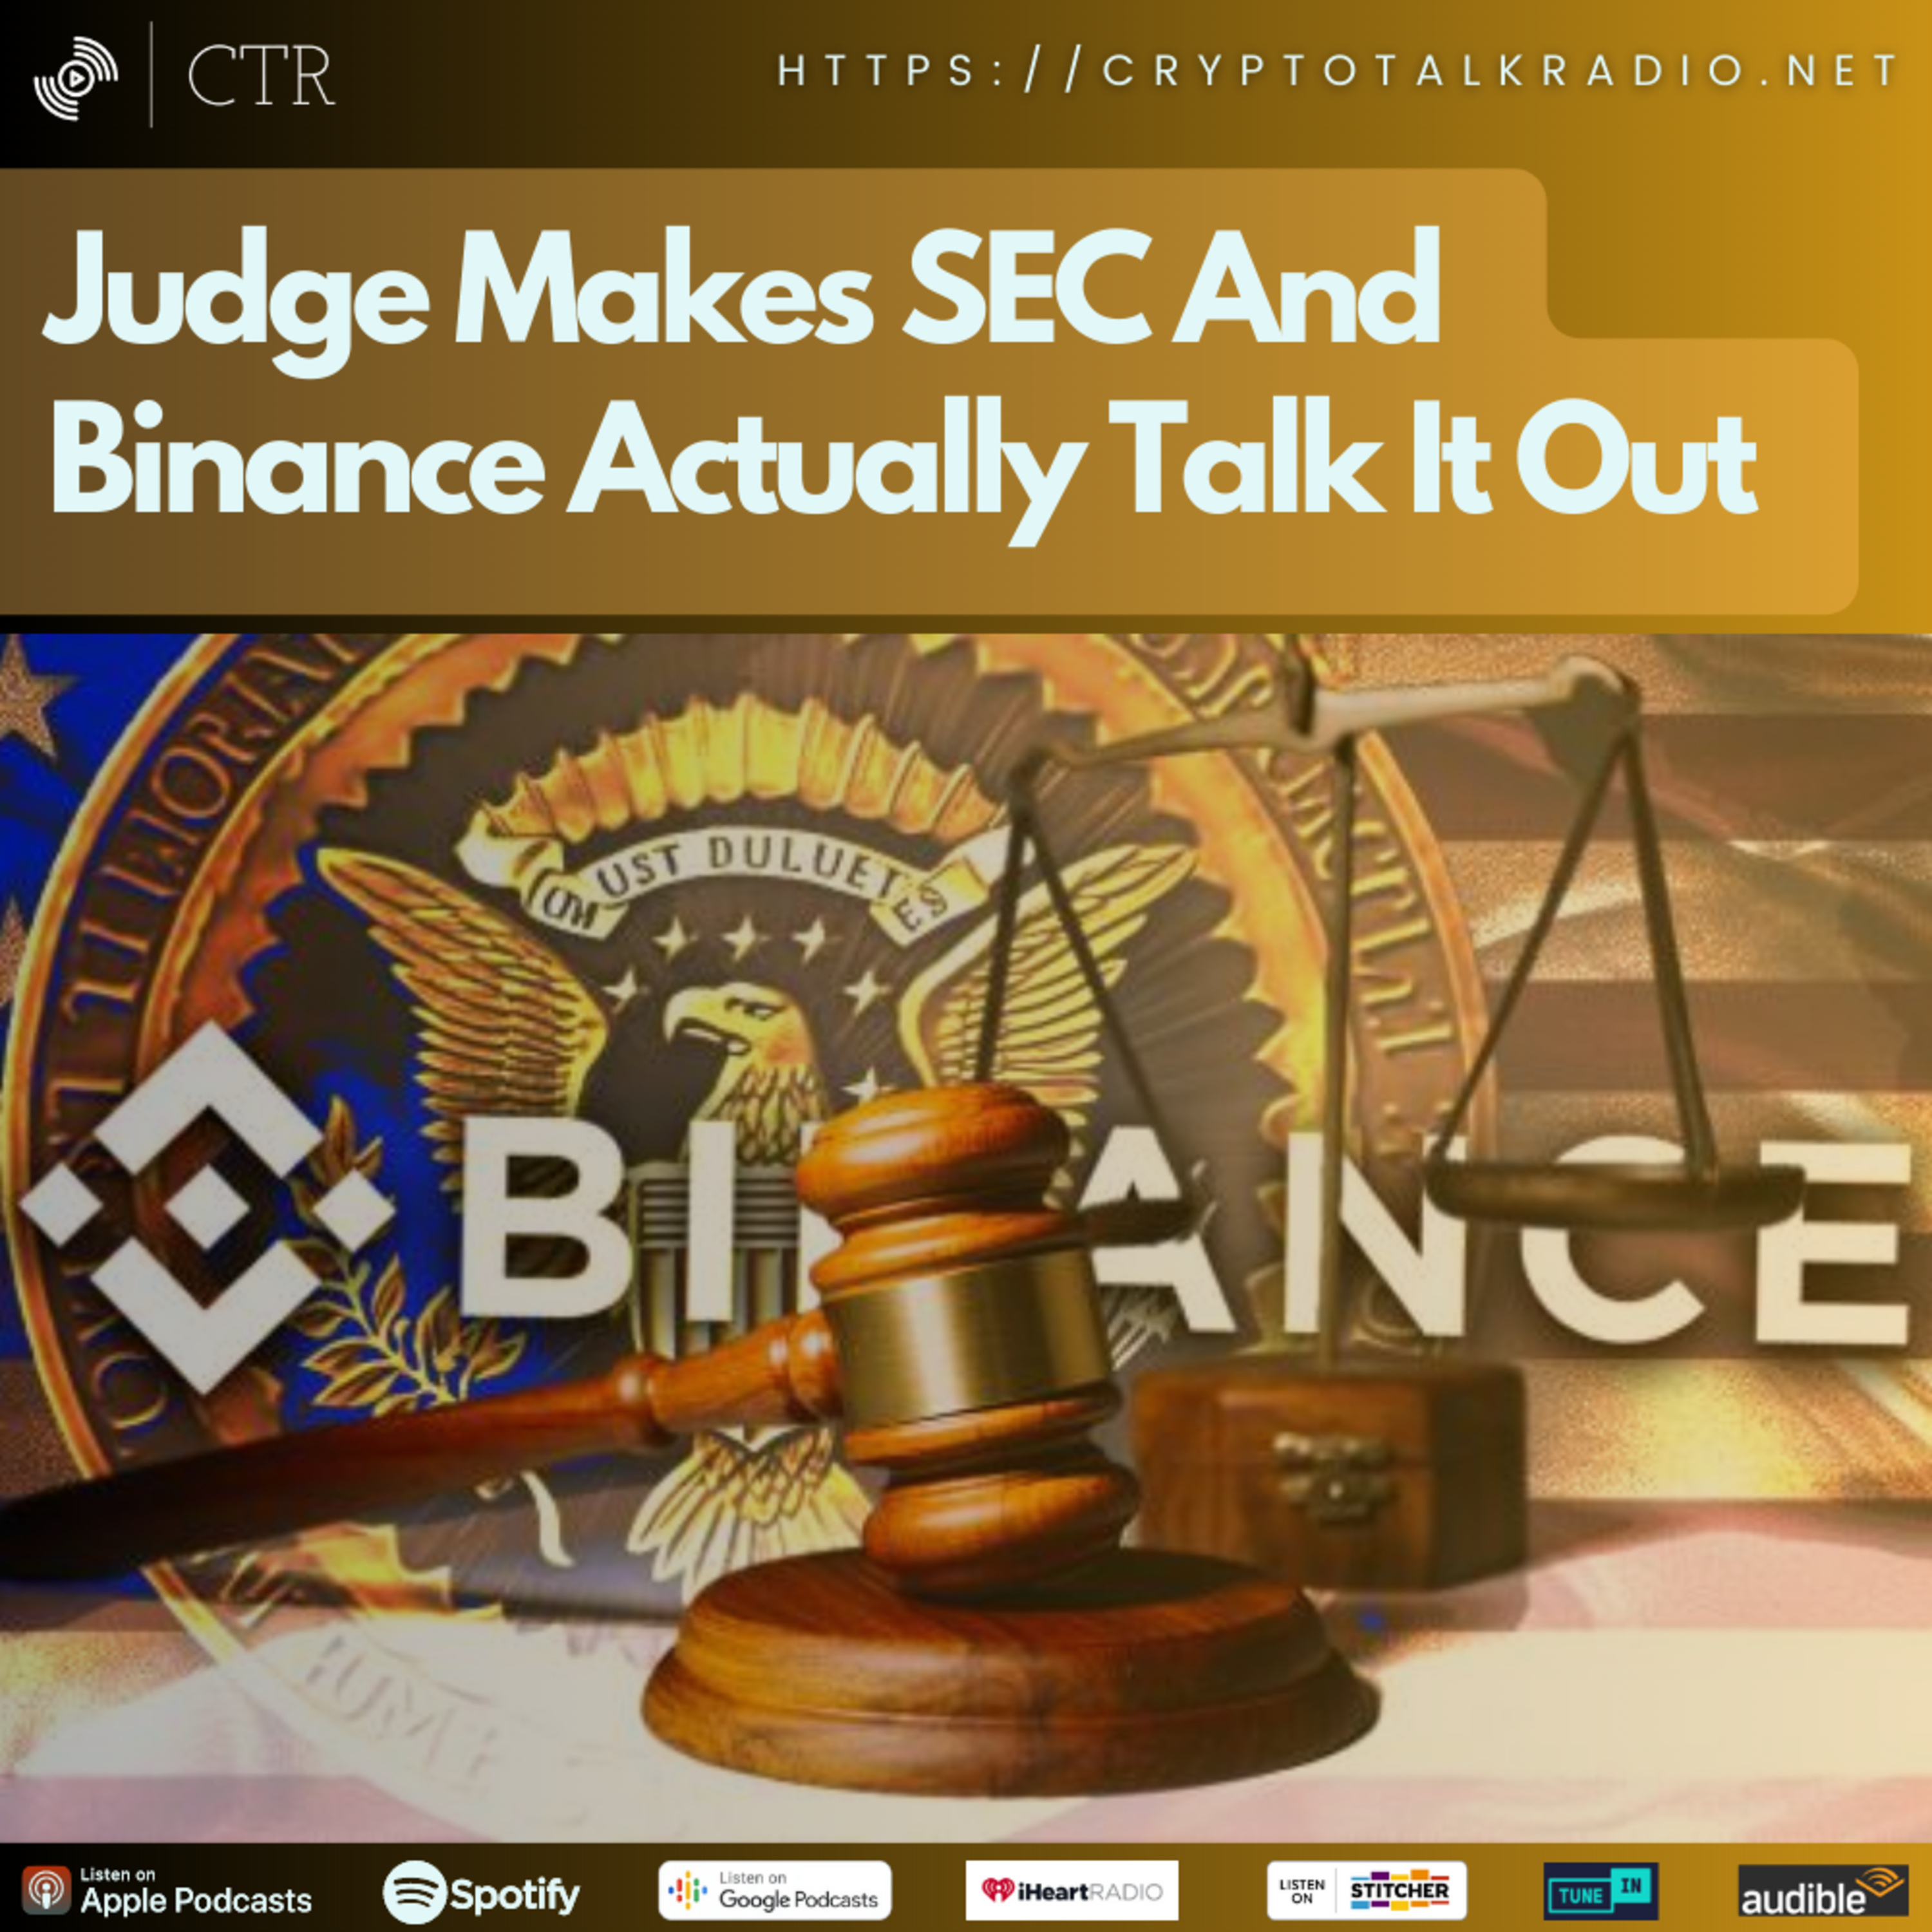 Judge Makes SEC And Binance Actually Talk It Out